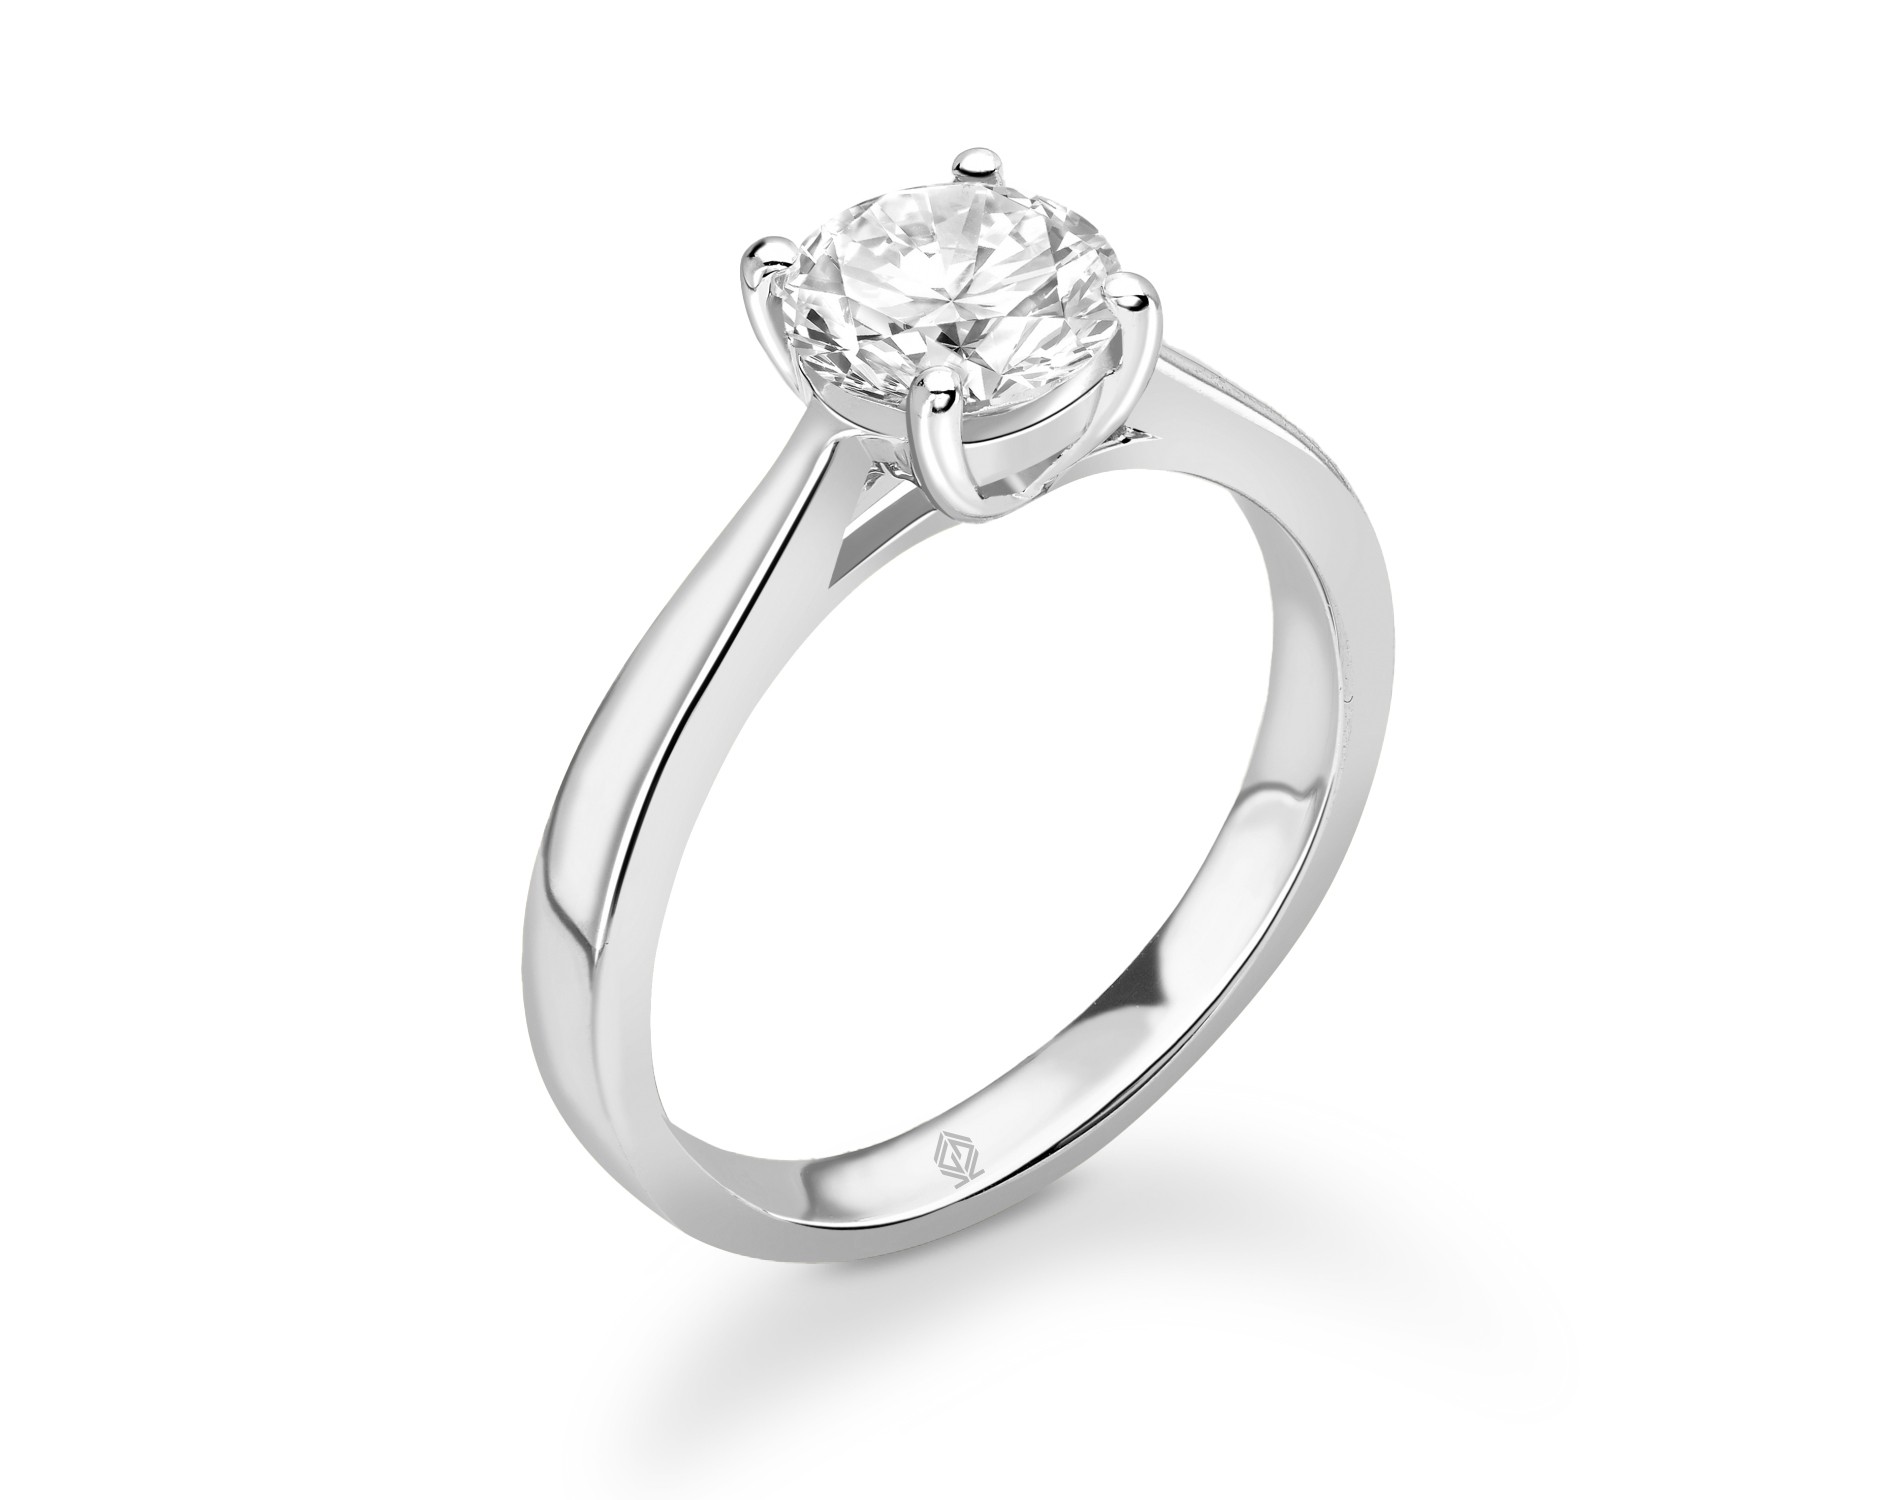 18K WHITE GOLD 4 PRONGS SOLITAIRE ROUND CUT DIAMOND WITH PLATINUM SHANK ENGAGEMENT RING